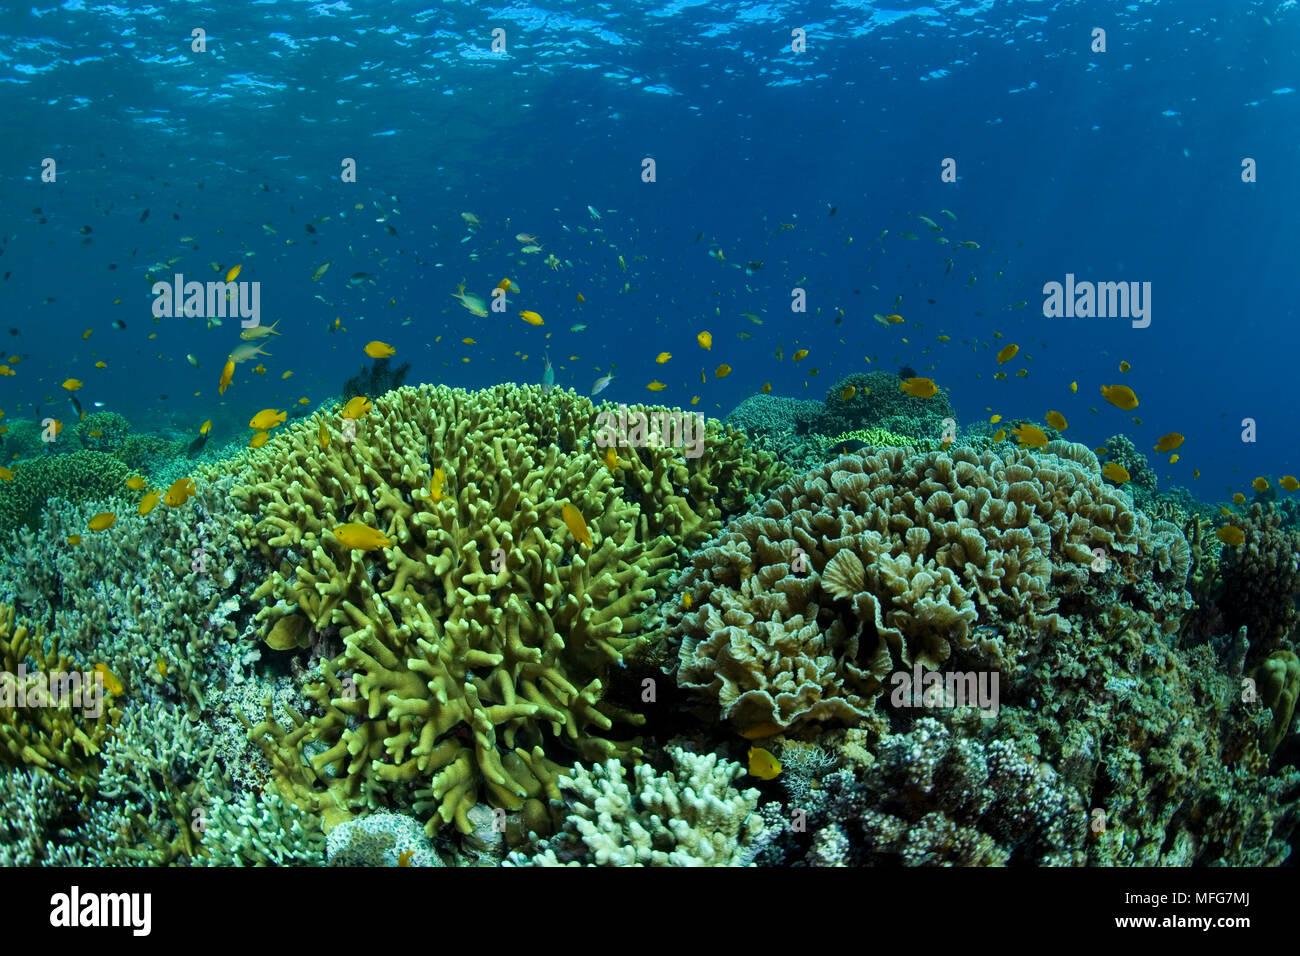 Hard coral reef, Stylophora pistillata and other species, Talisay Tree Reef, Cabilao Island, Bohol, Central Visayas, Philippines, Pacific Ocean  Date: Stock Photo